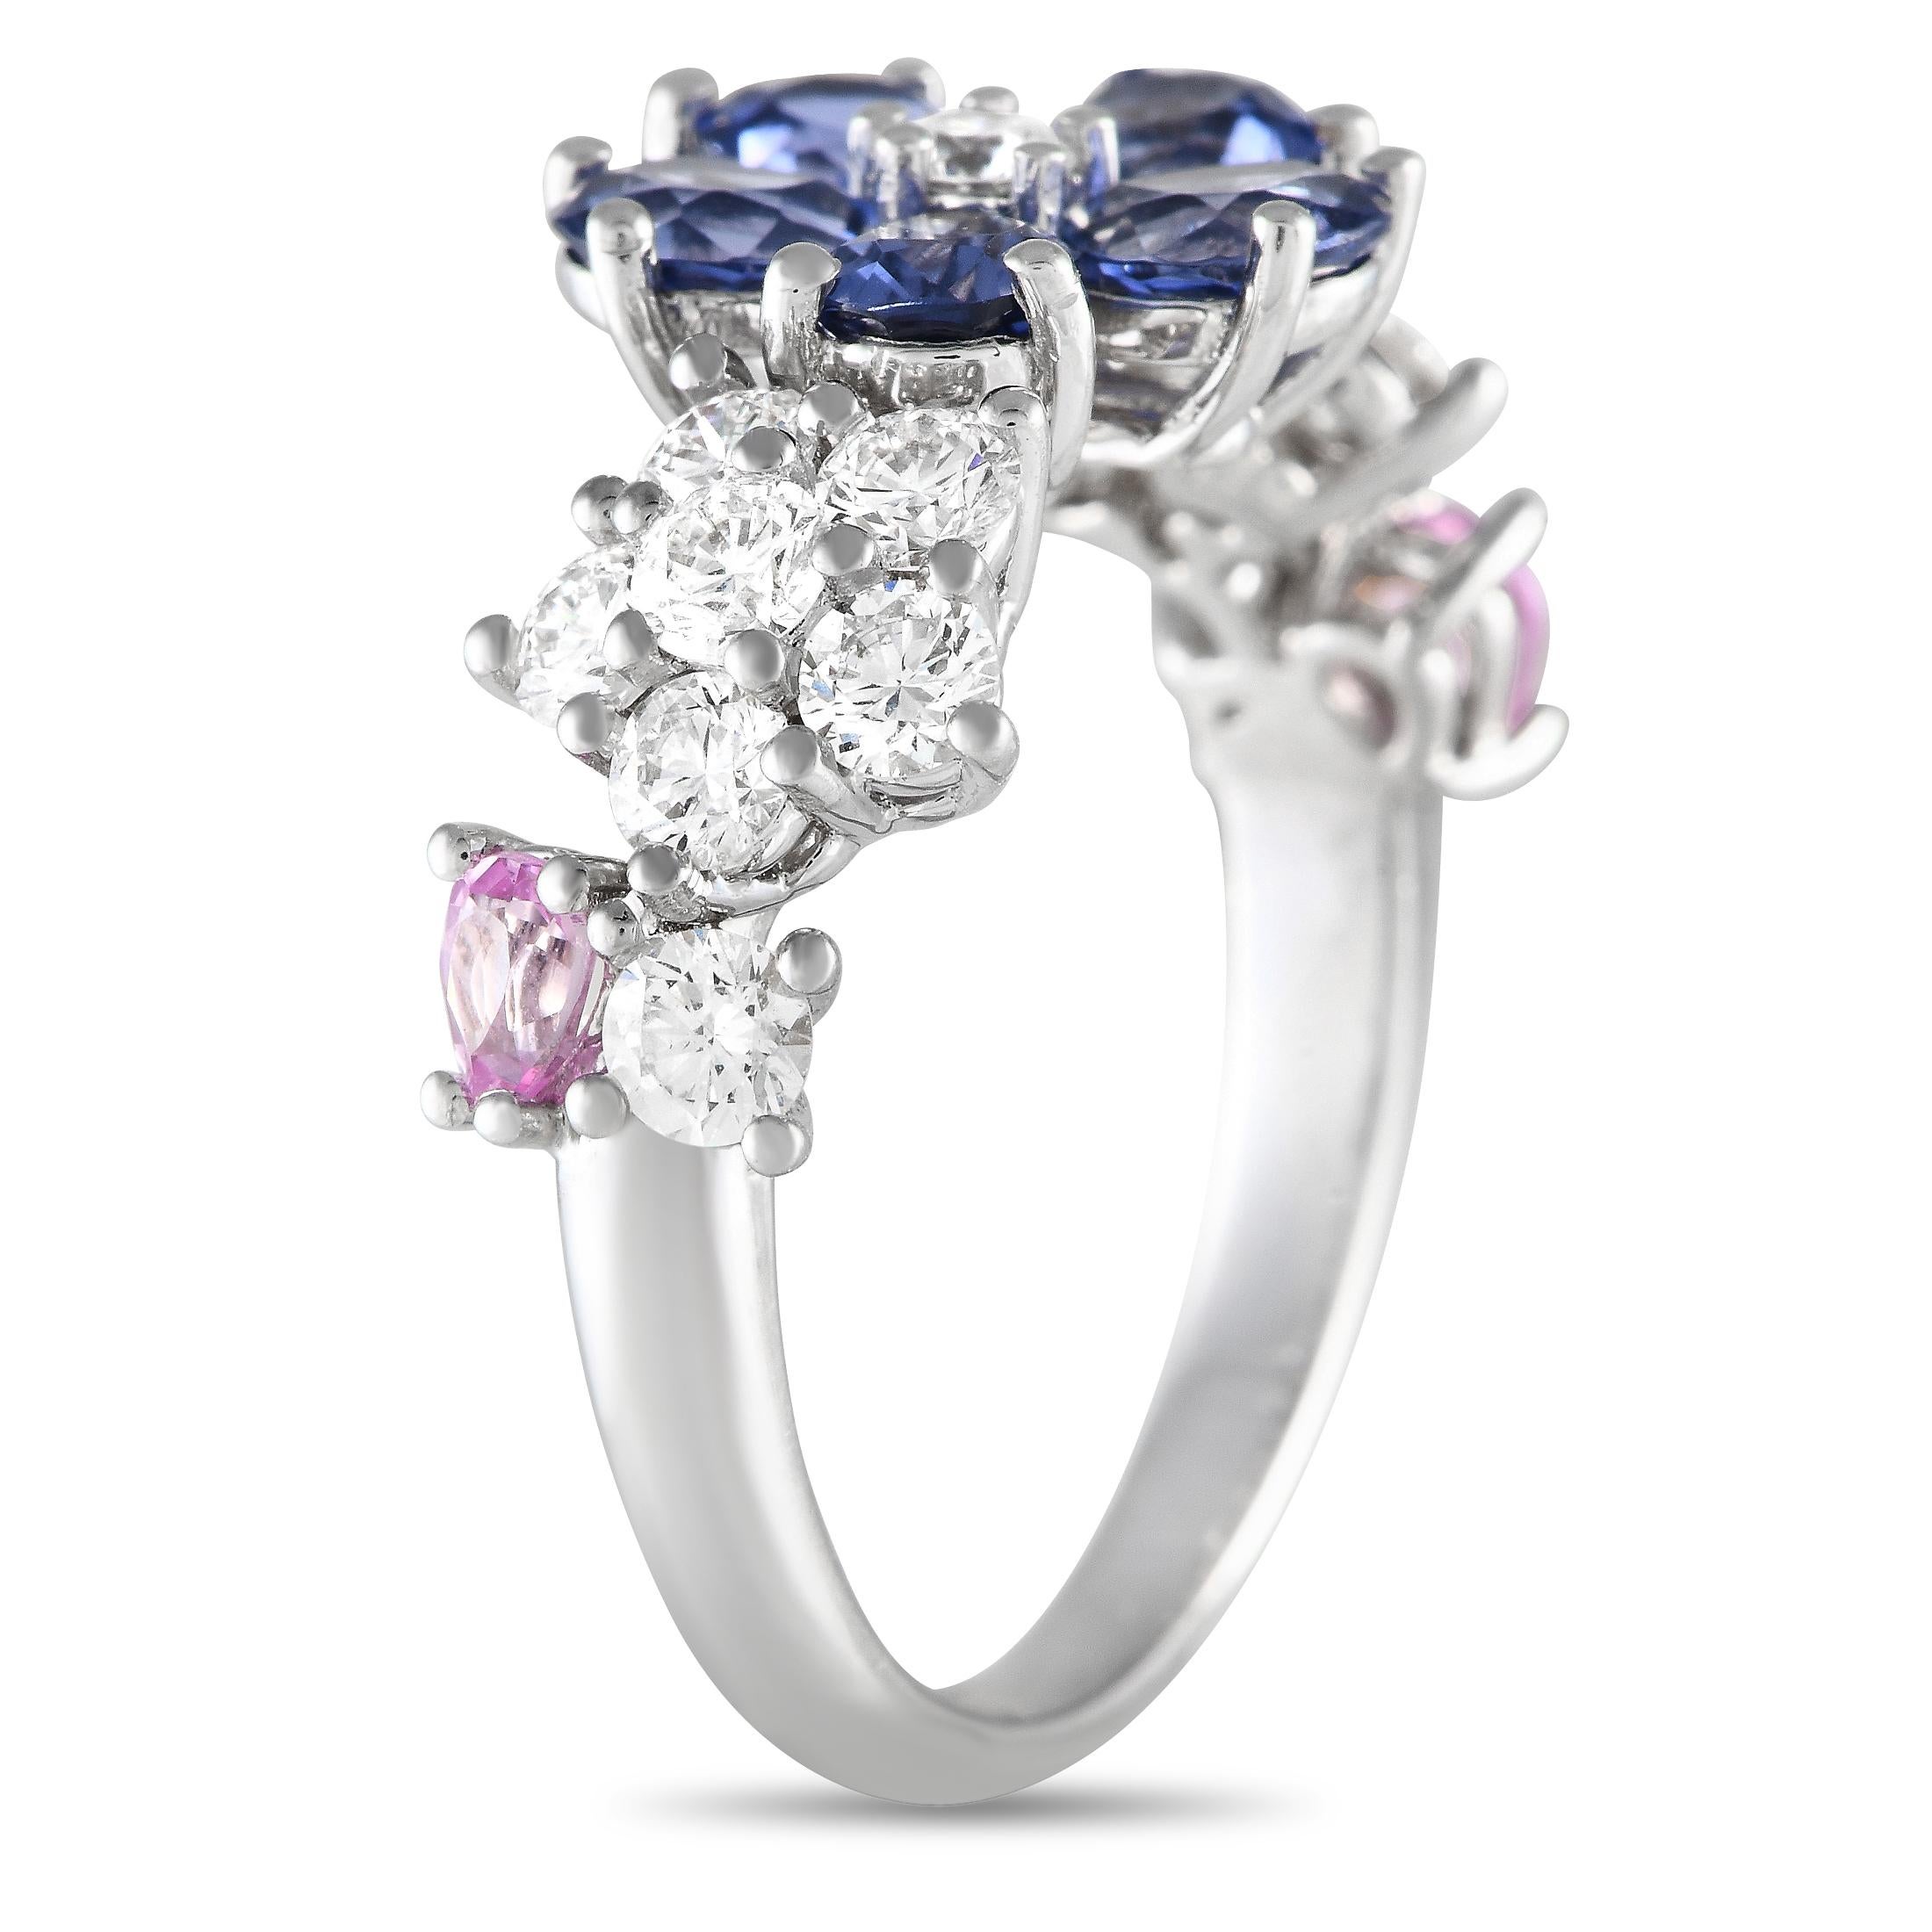 Like all pieces from the Van Cleef & Arpels Folie des Pre's collection, this radiant ring celebrates the beauty of wildflowers. Colorful Sapphires totaling 2.72 carats make the floral motifs incredibly breathtaking. Diamonds with a total weight of